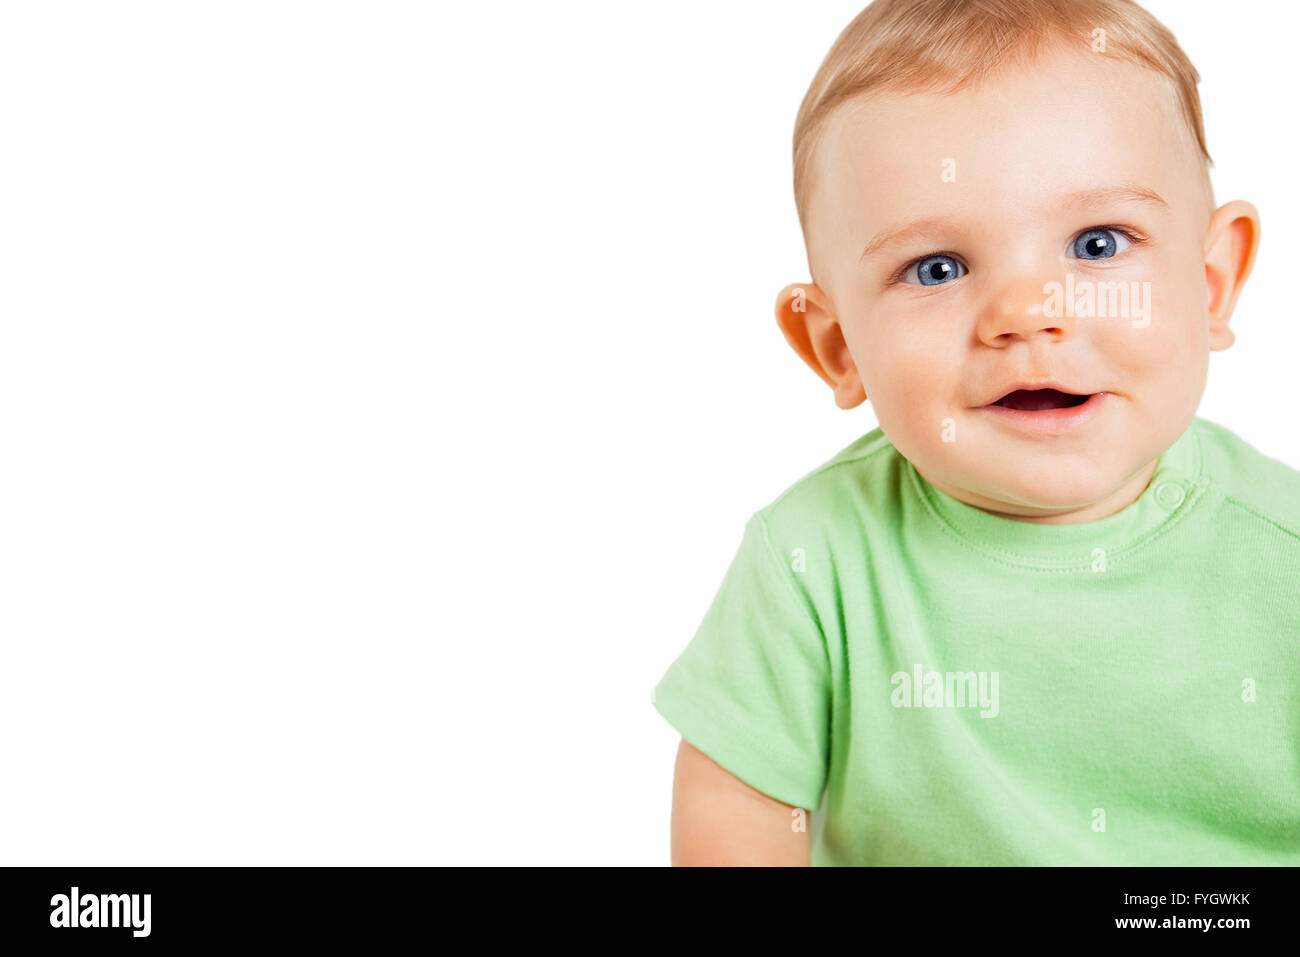 Funny Face Expression of Cute Baby Boy Stock Photo - Alamy